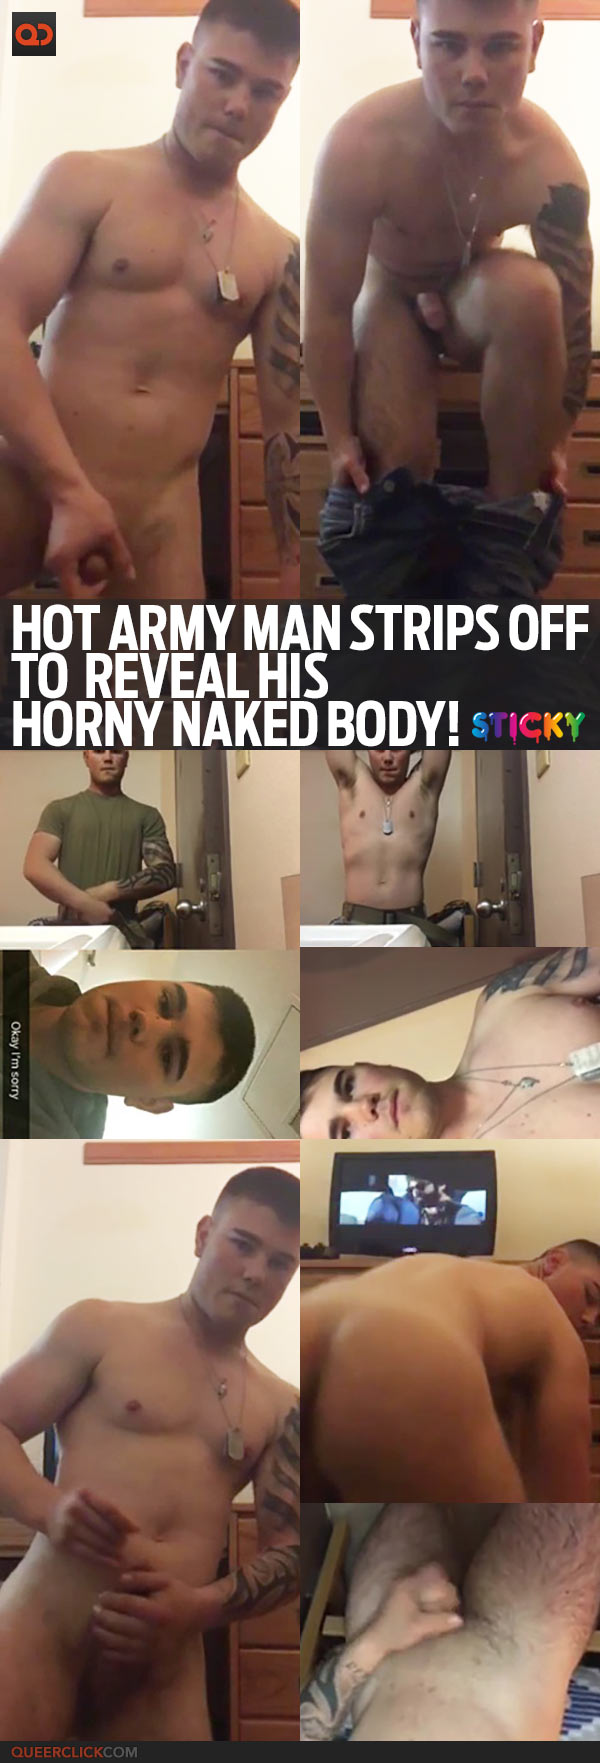 Hot Army Man Strips Off To Reveal His Horny Naked Body!